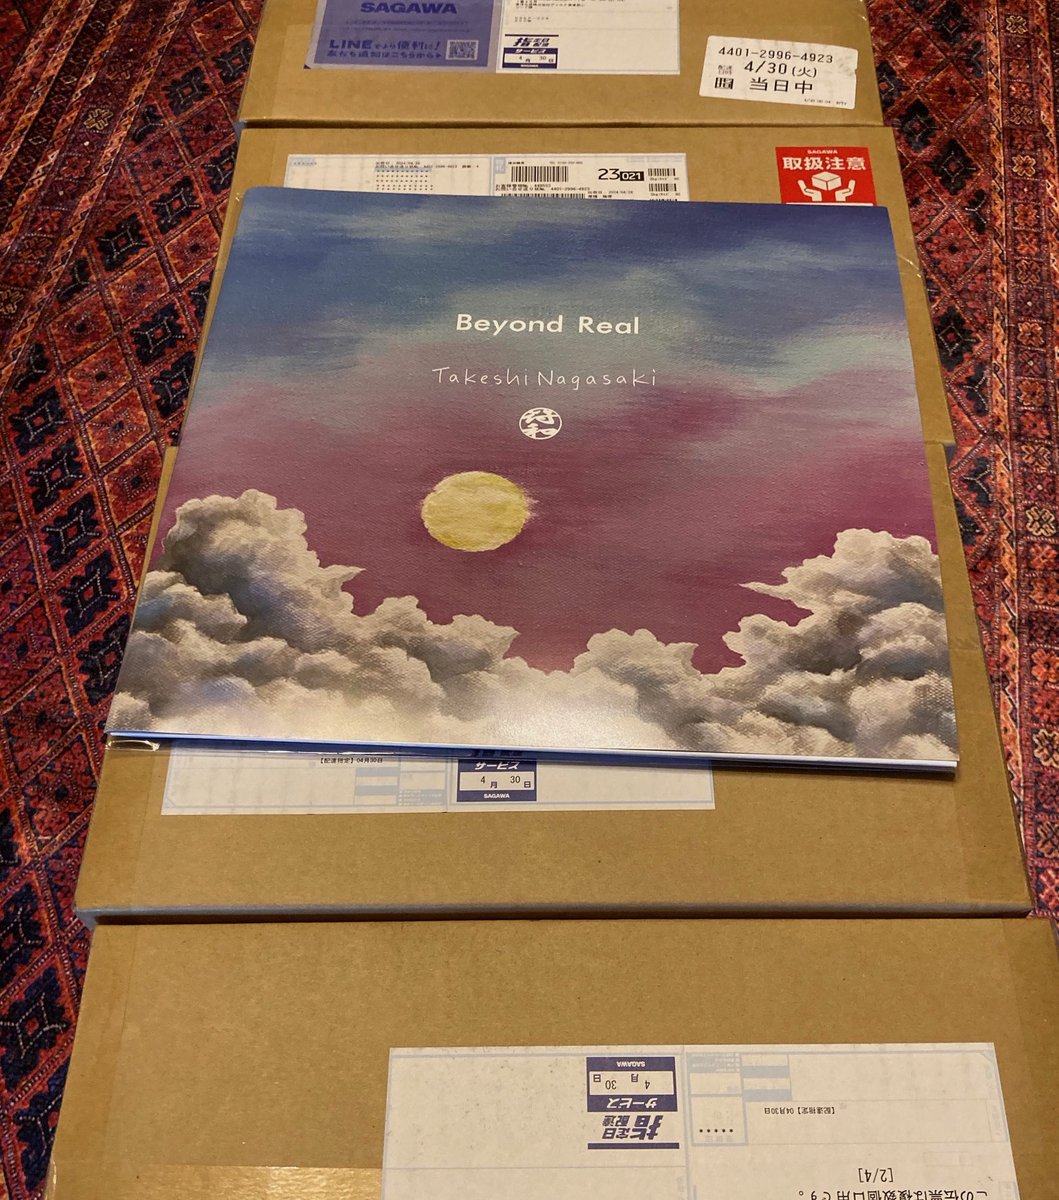 6.12 Release Beyond Real 12inch